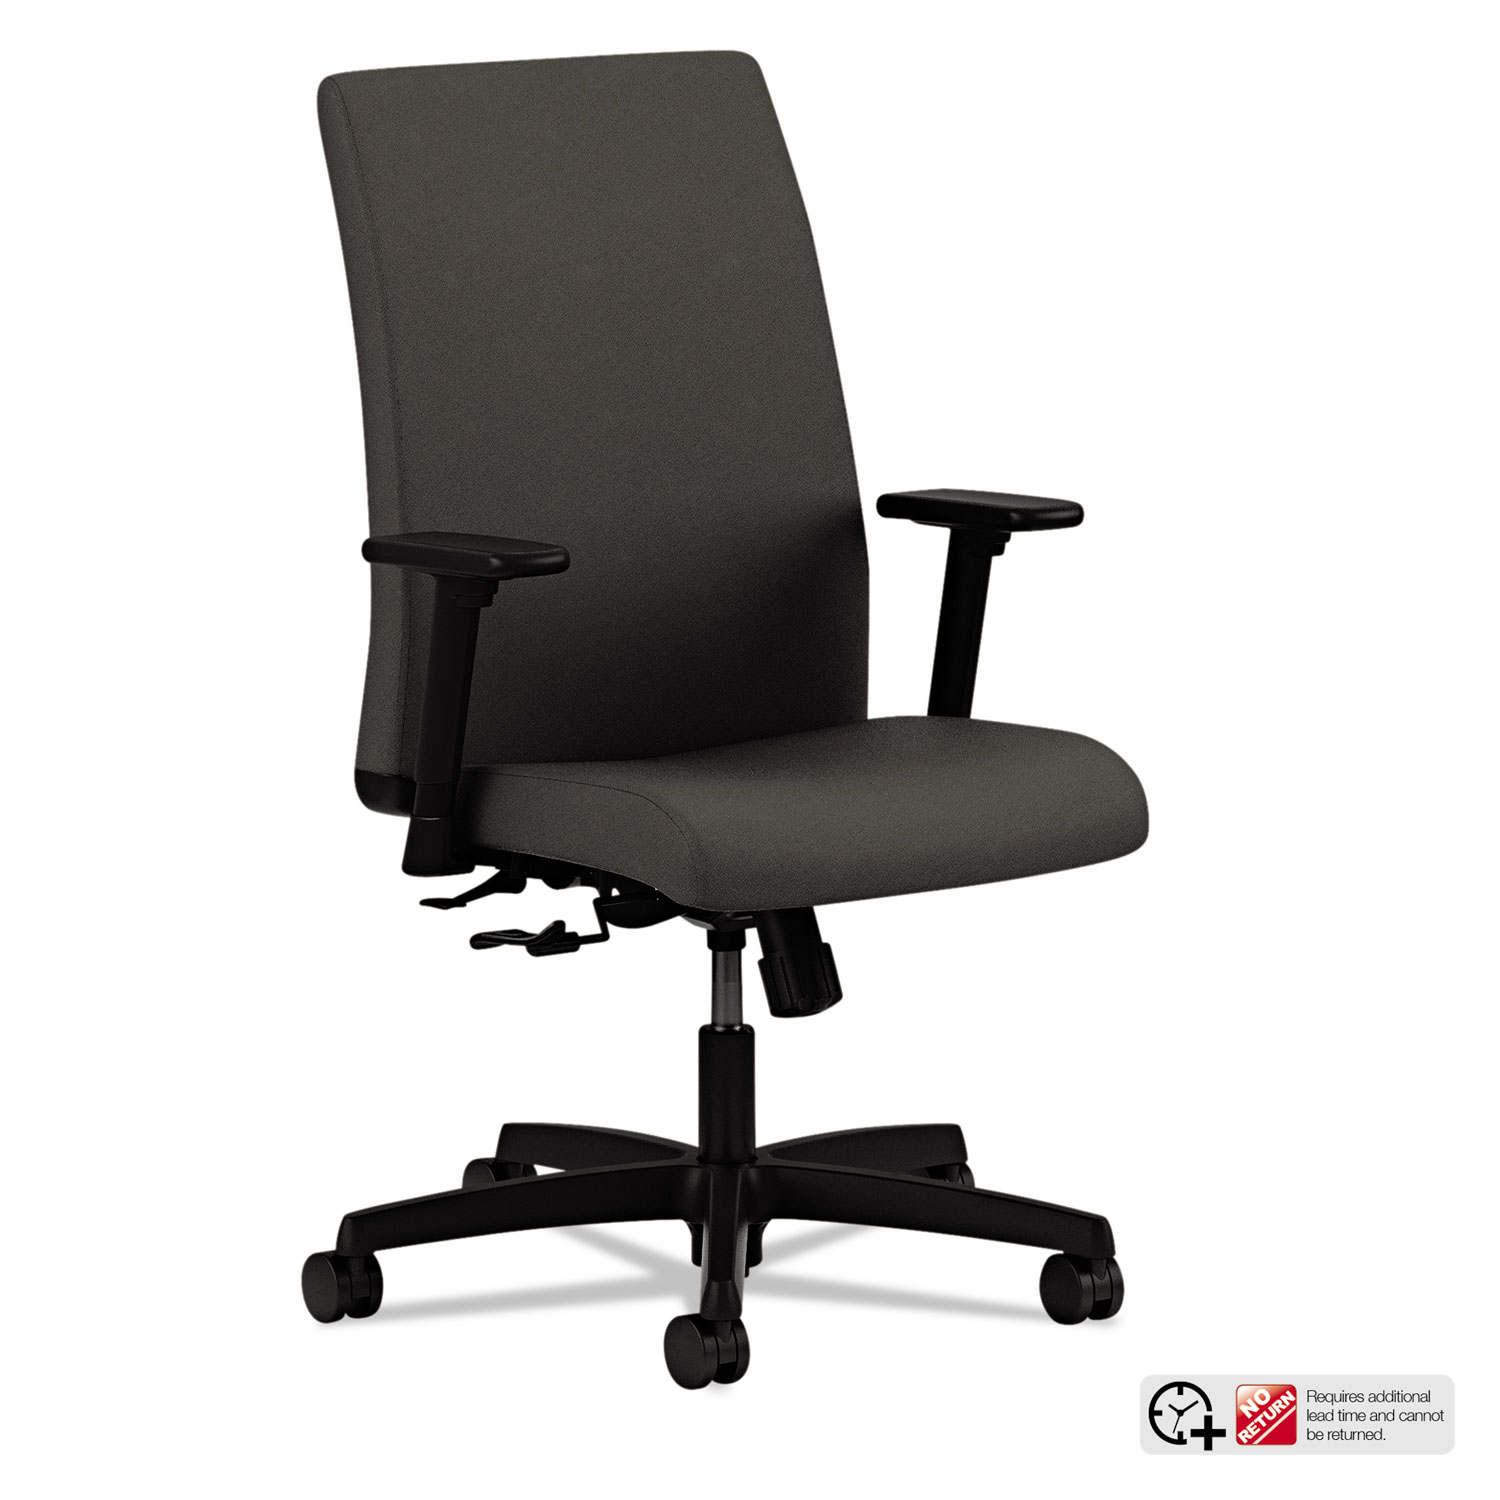  HON HITL1.A.H.U.CU19.T.SB Ignition Series Fabric Low-Back Task Chair, Supports up to 300 lbs., Iron Ore Seat/Iron Ore Back, Black Base (HONIT105CU19) 